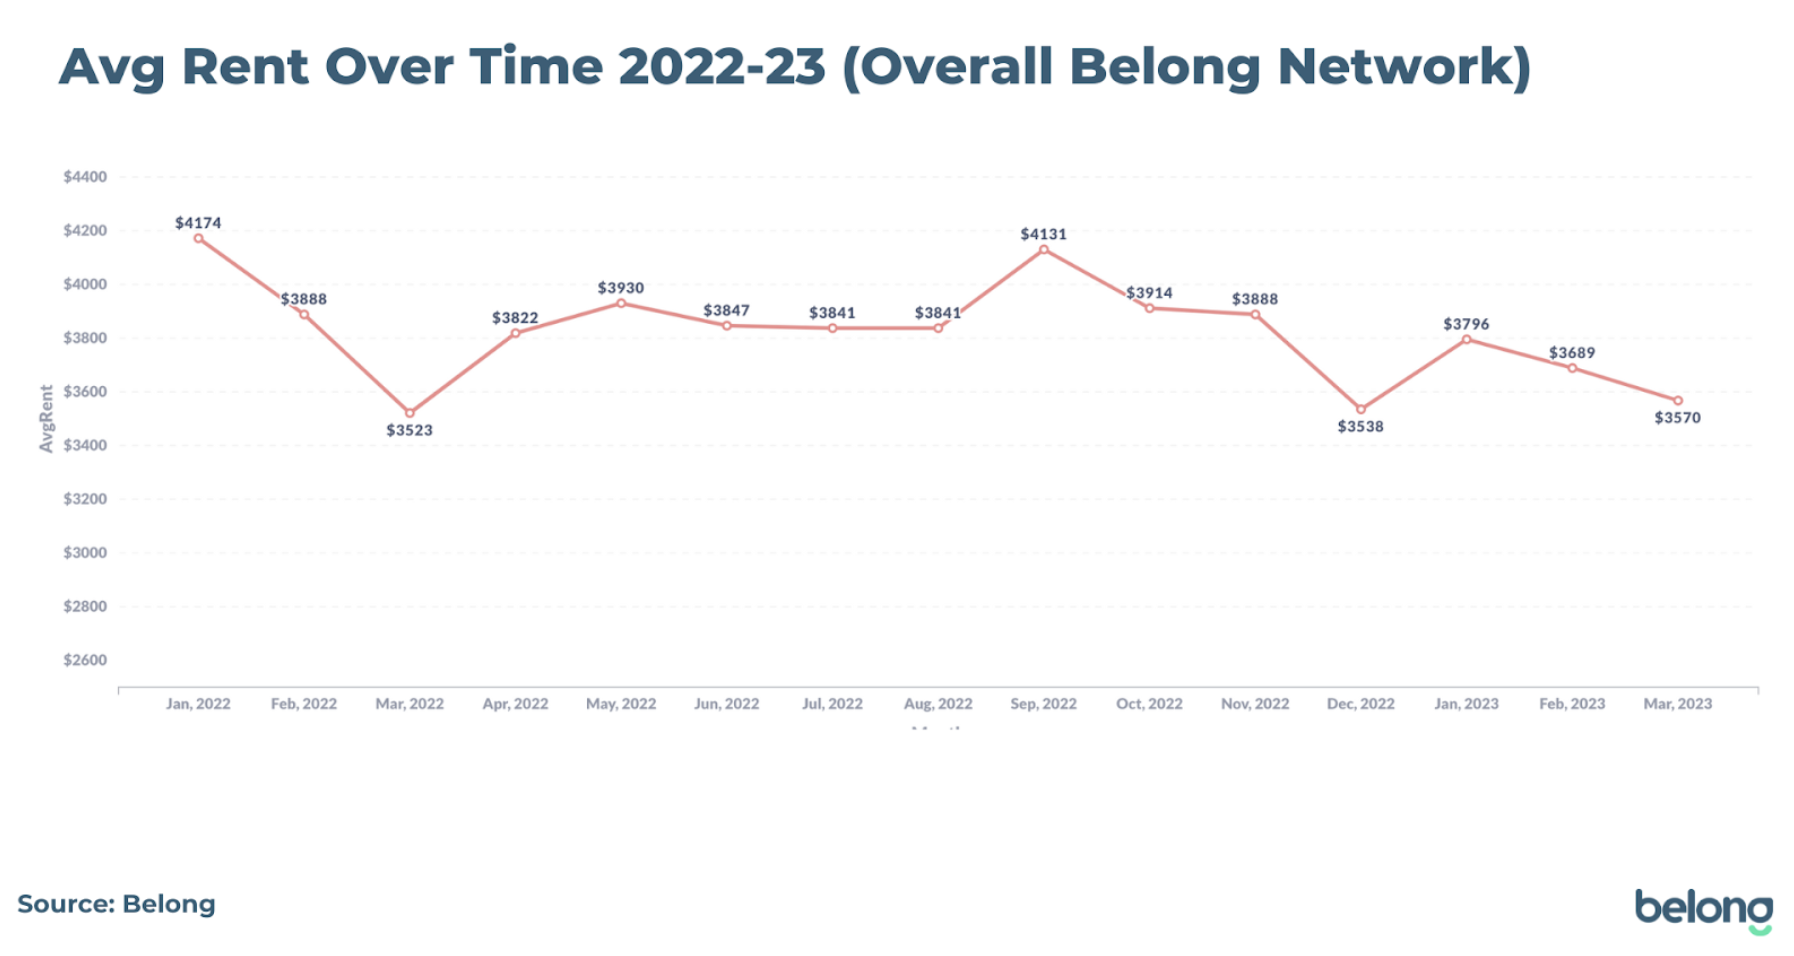 avg rent over time 2022-2023